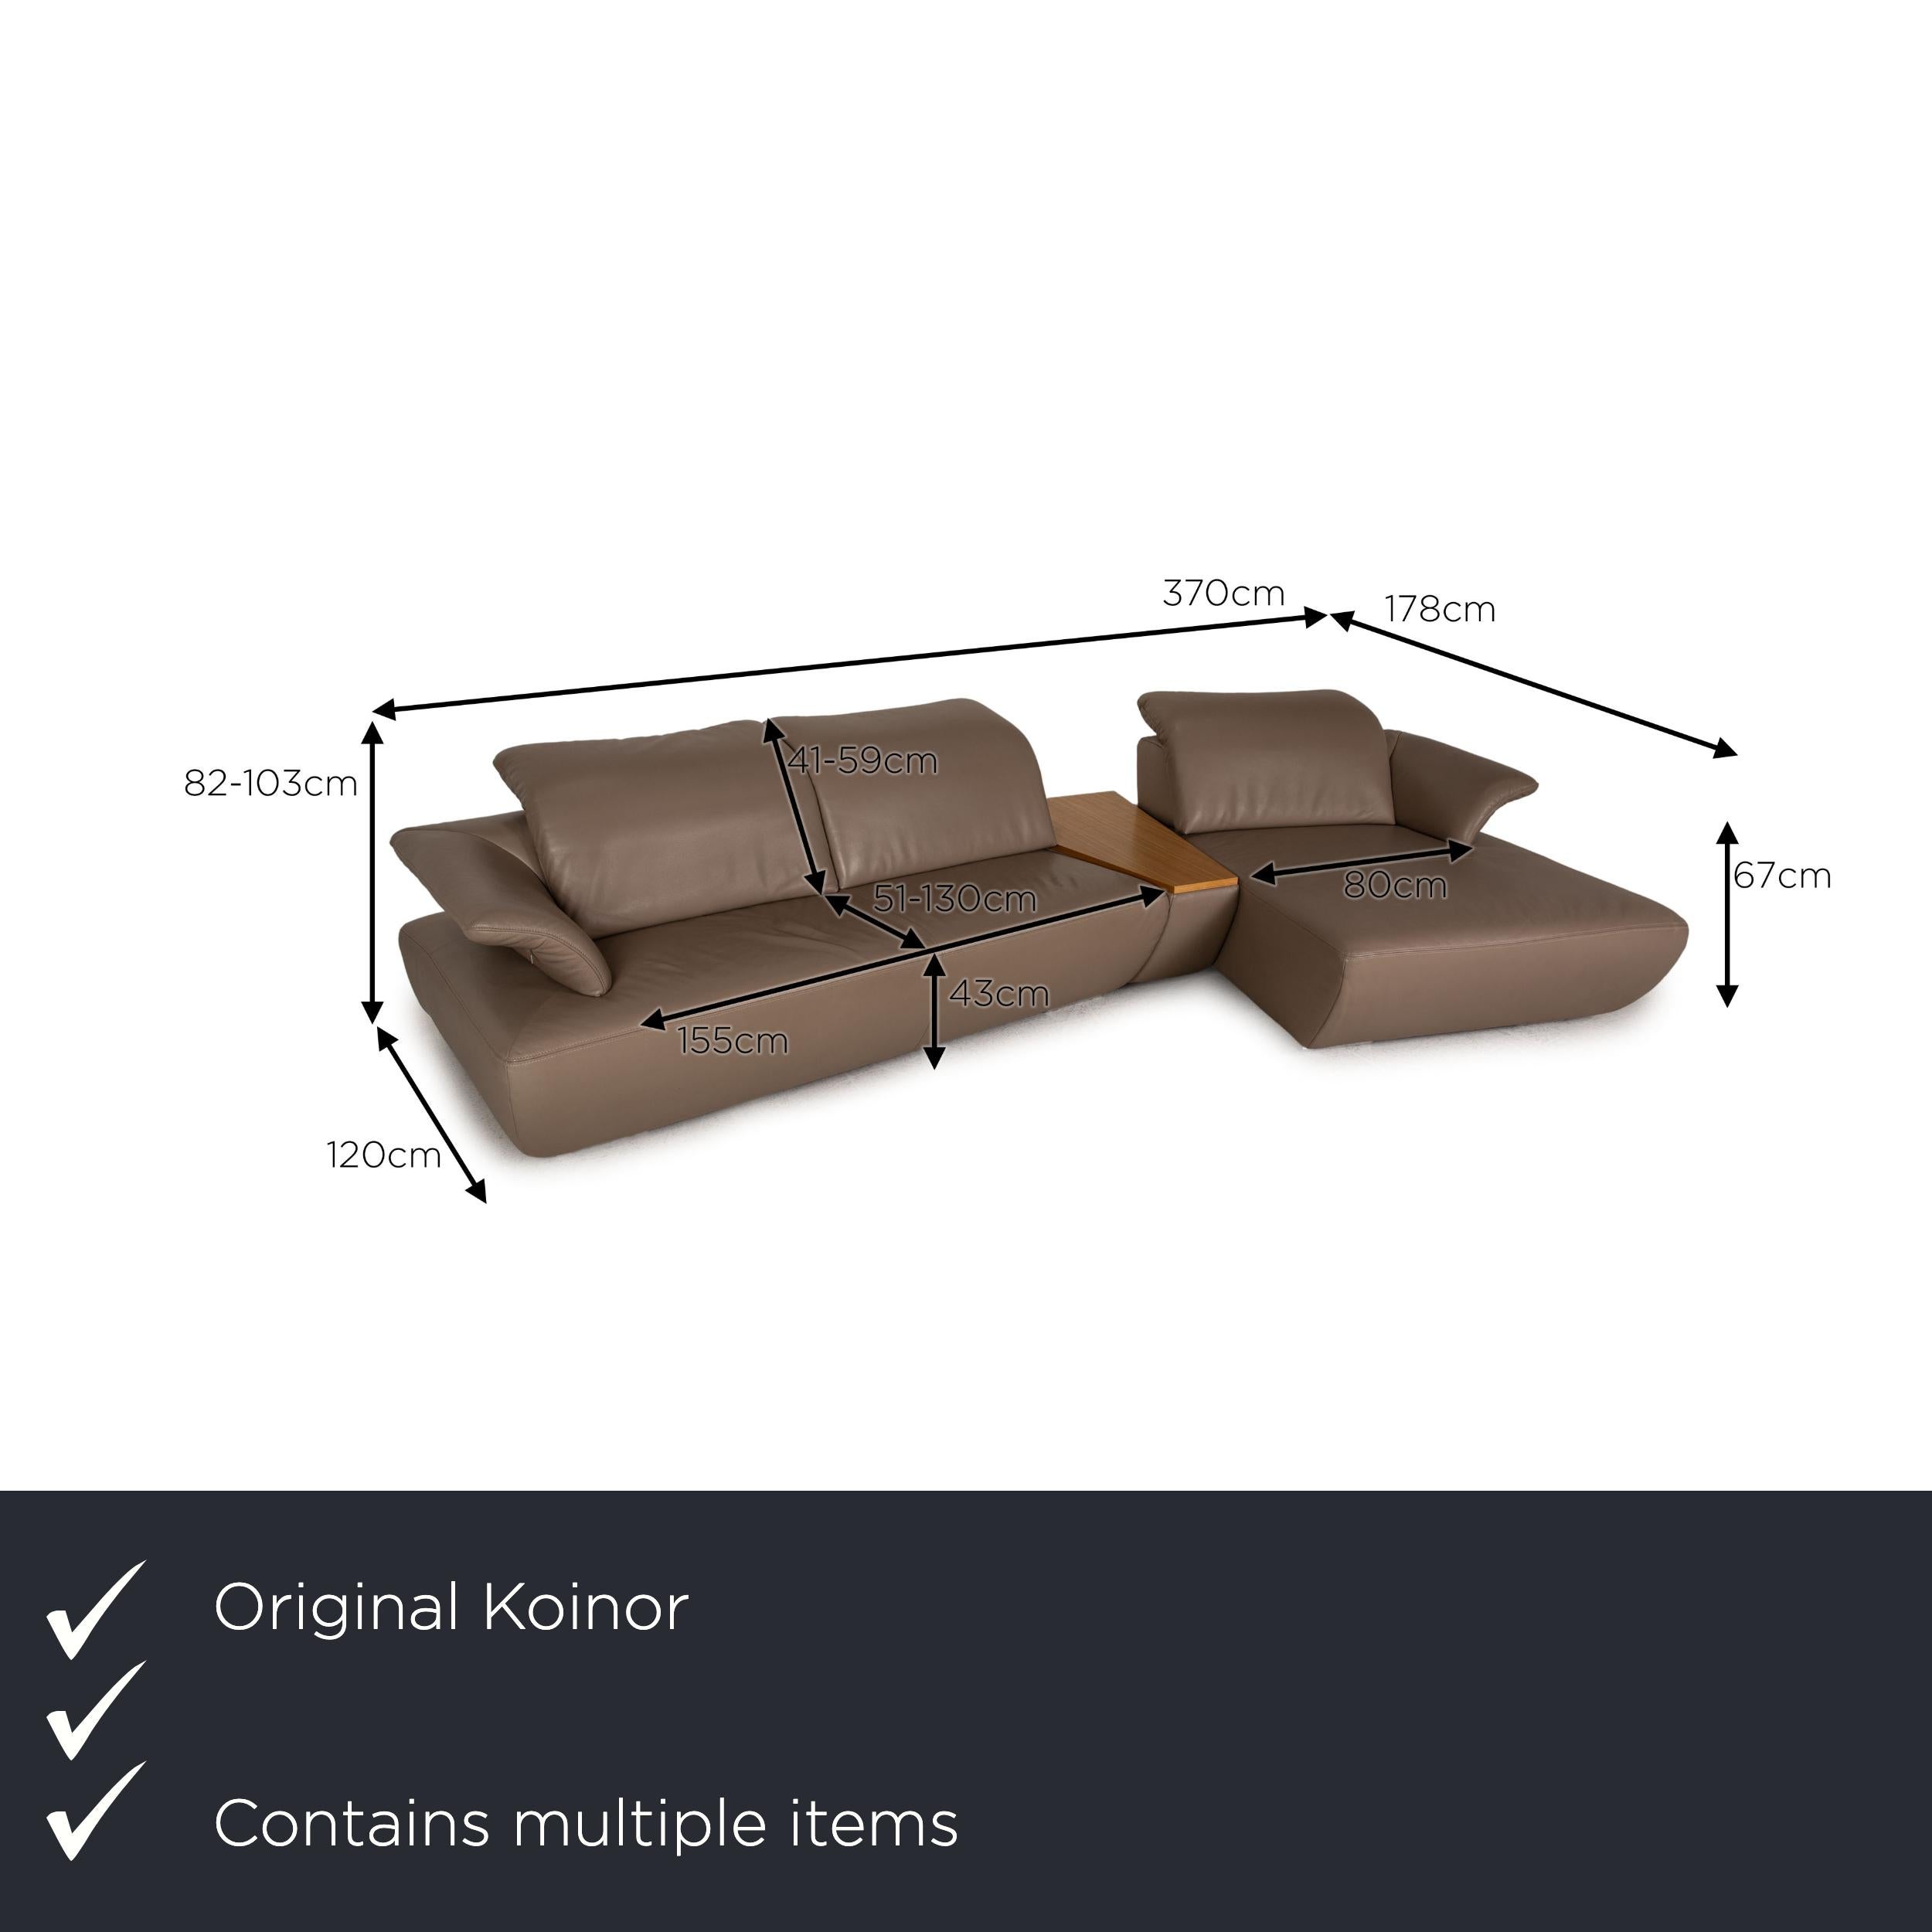 We present to you a Koinor Avanti leather sofa set beige corner sofa ottoman.

Product measurements in centimeters:

depth: 120
width: 370
height: 82
seat height: 43
rest height: 67
seat depth: 51
seat width: 155
back height: 41.

 